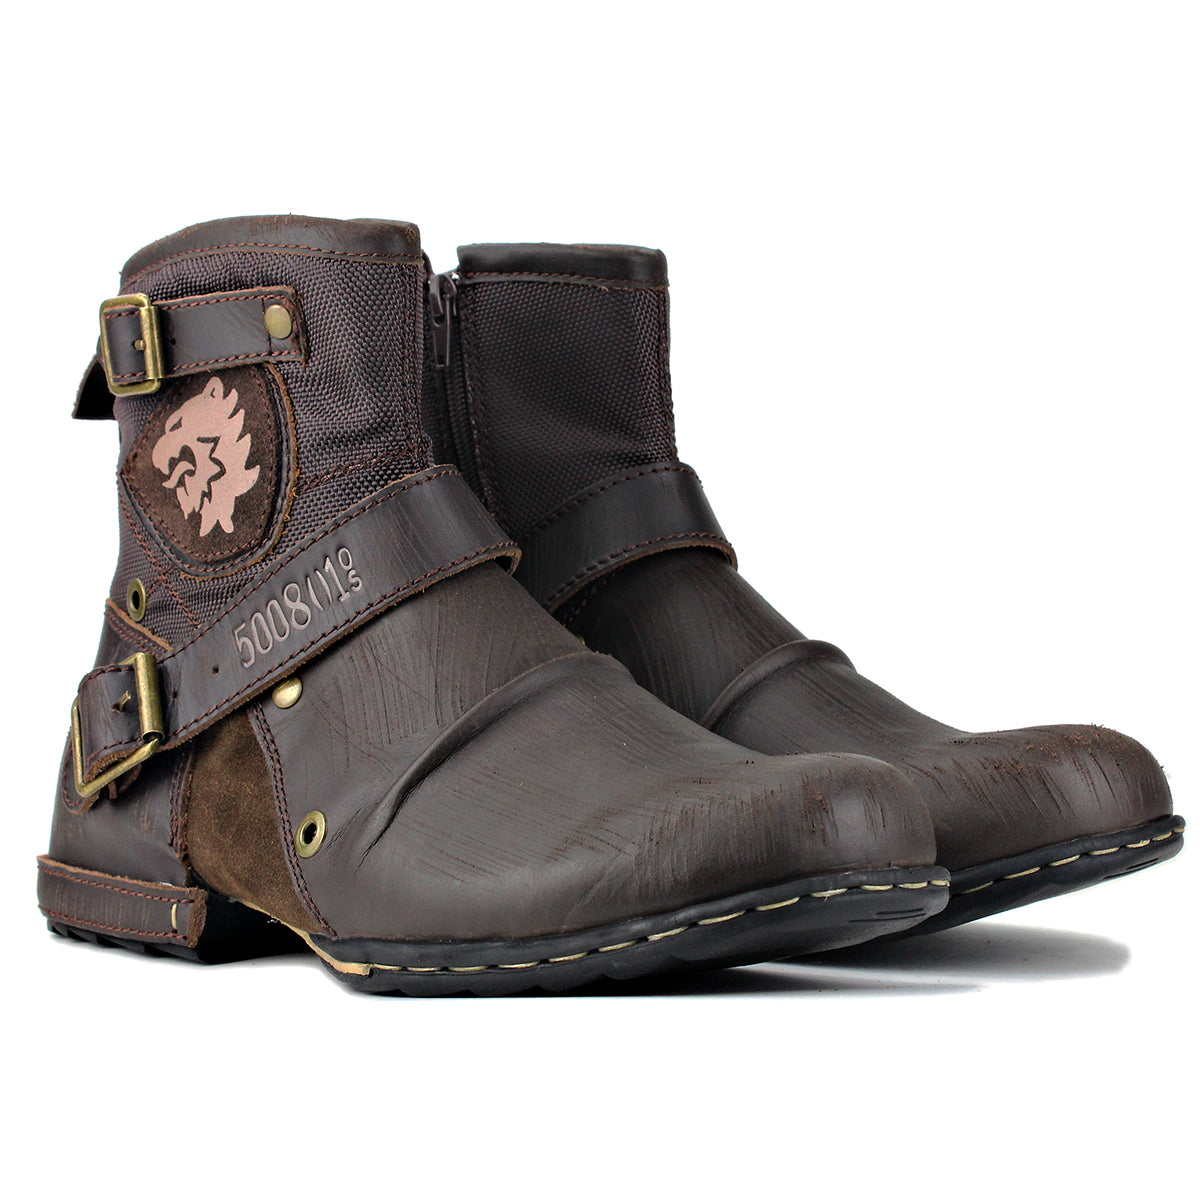 WIIPOP Genuine Leather High Quality Boots